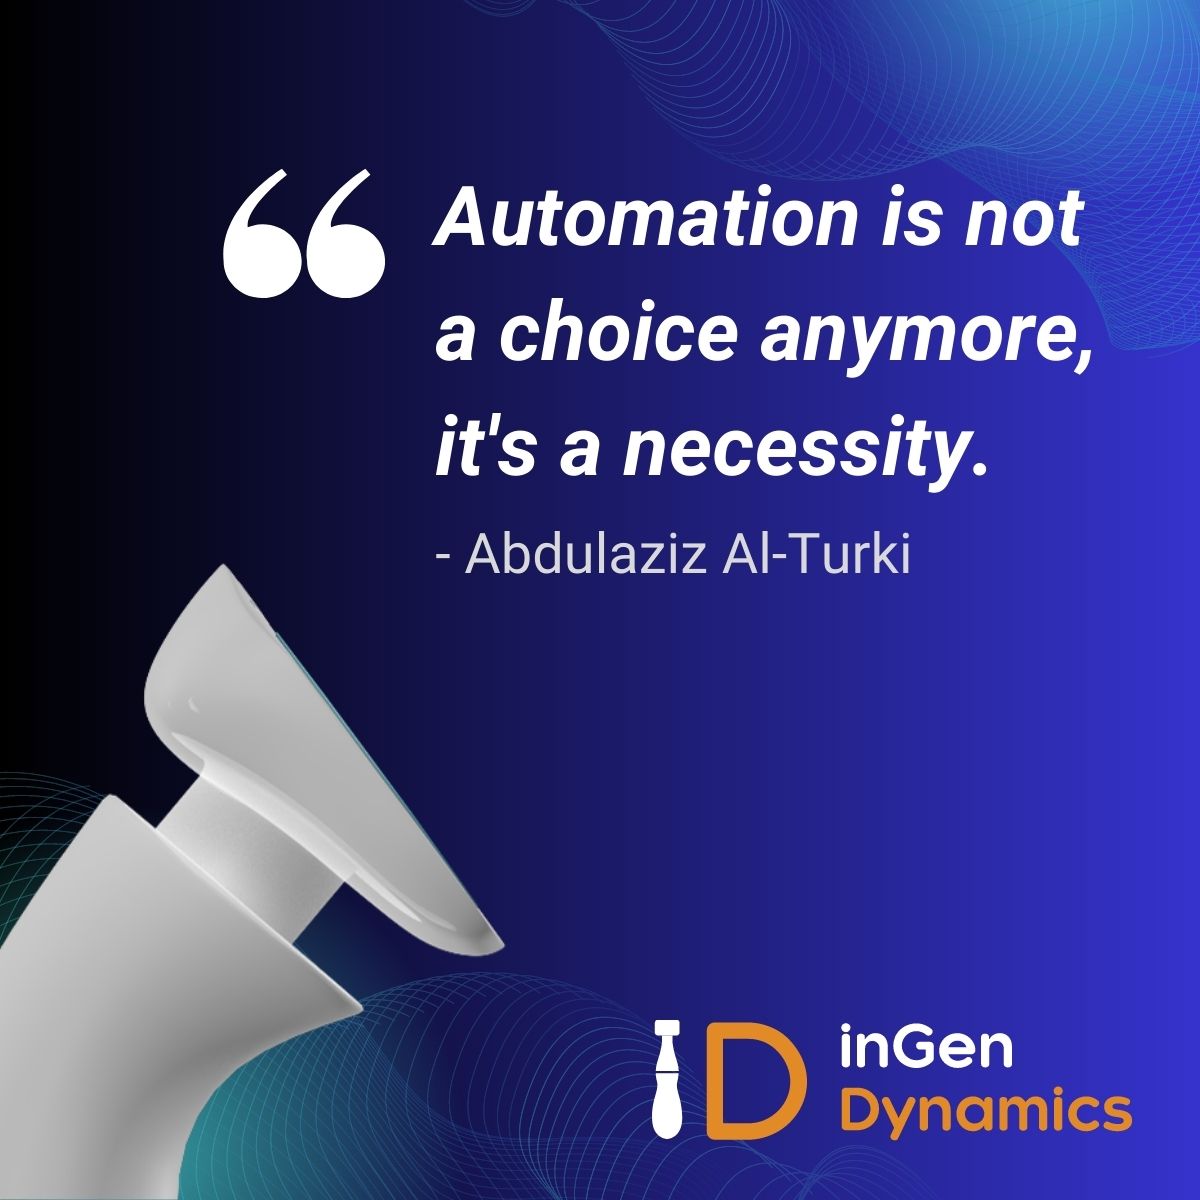 🤖 Automation has become an essential tool in our journey towards a brighter tomorrow. 🌅 Let's harness its power to drive progress, efficiency, and innovation. The future is bright! 💡🚀 #NecessityOfAutomation #BrightFuture